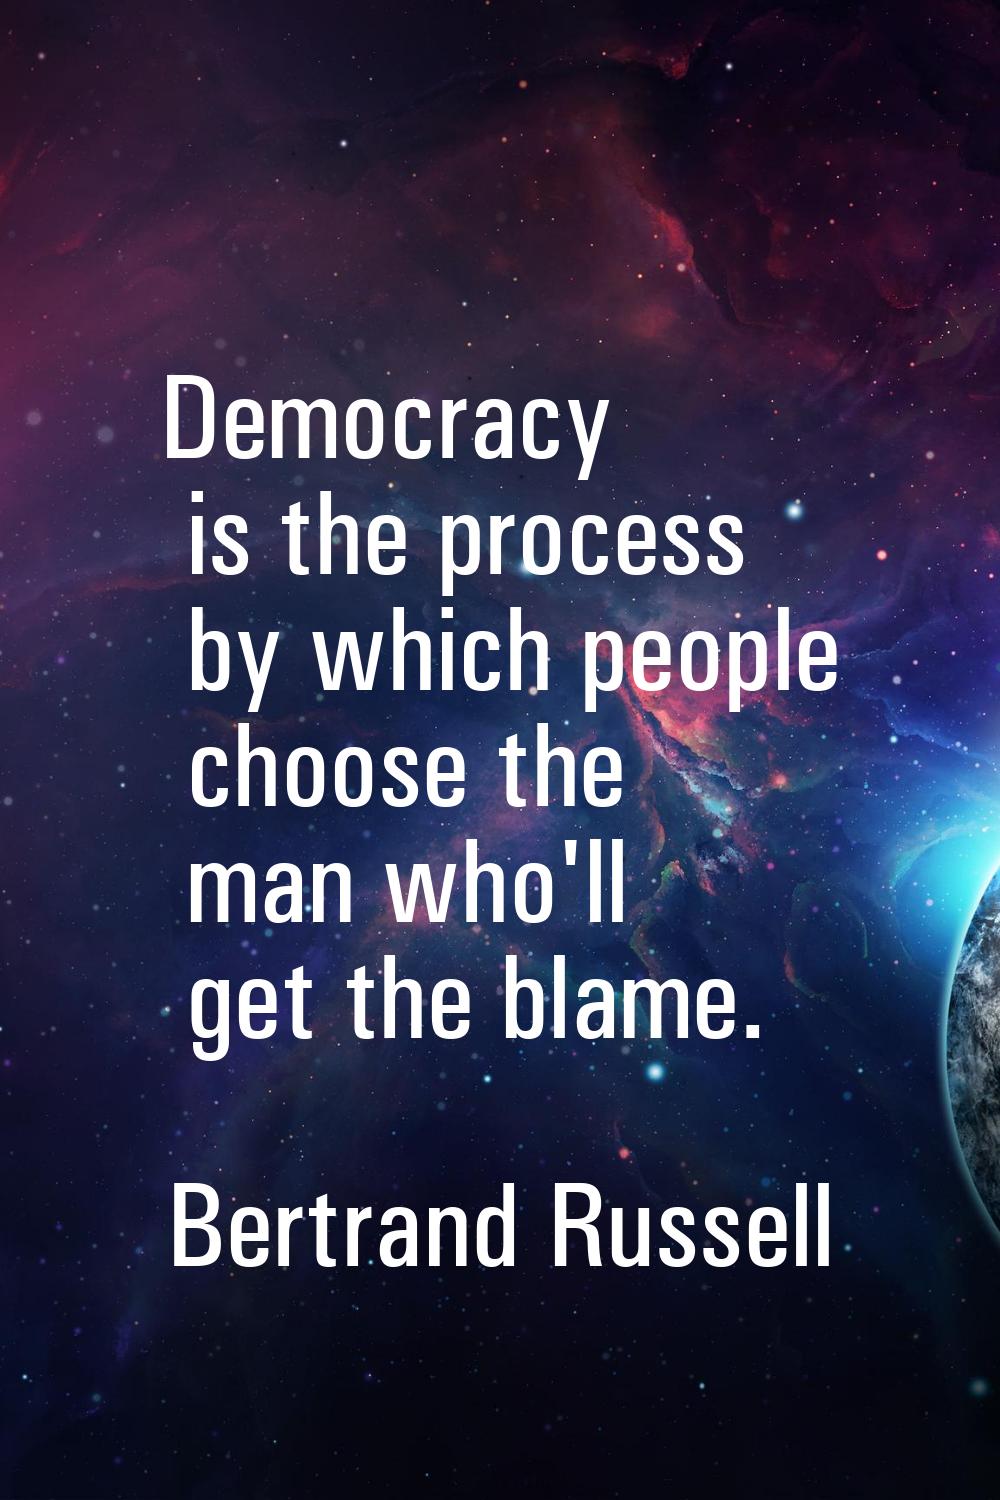 Democracy is the process by which people choose the man who'll get the blame.